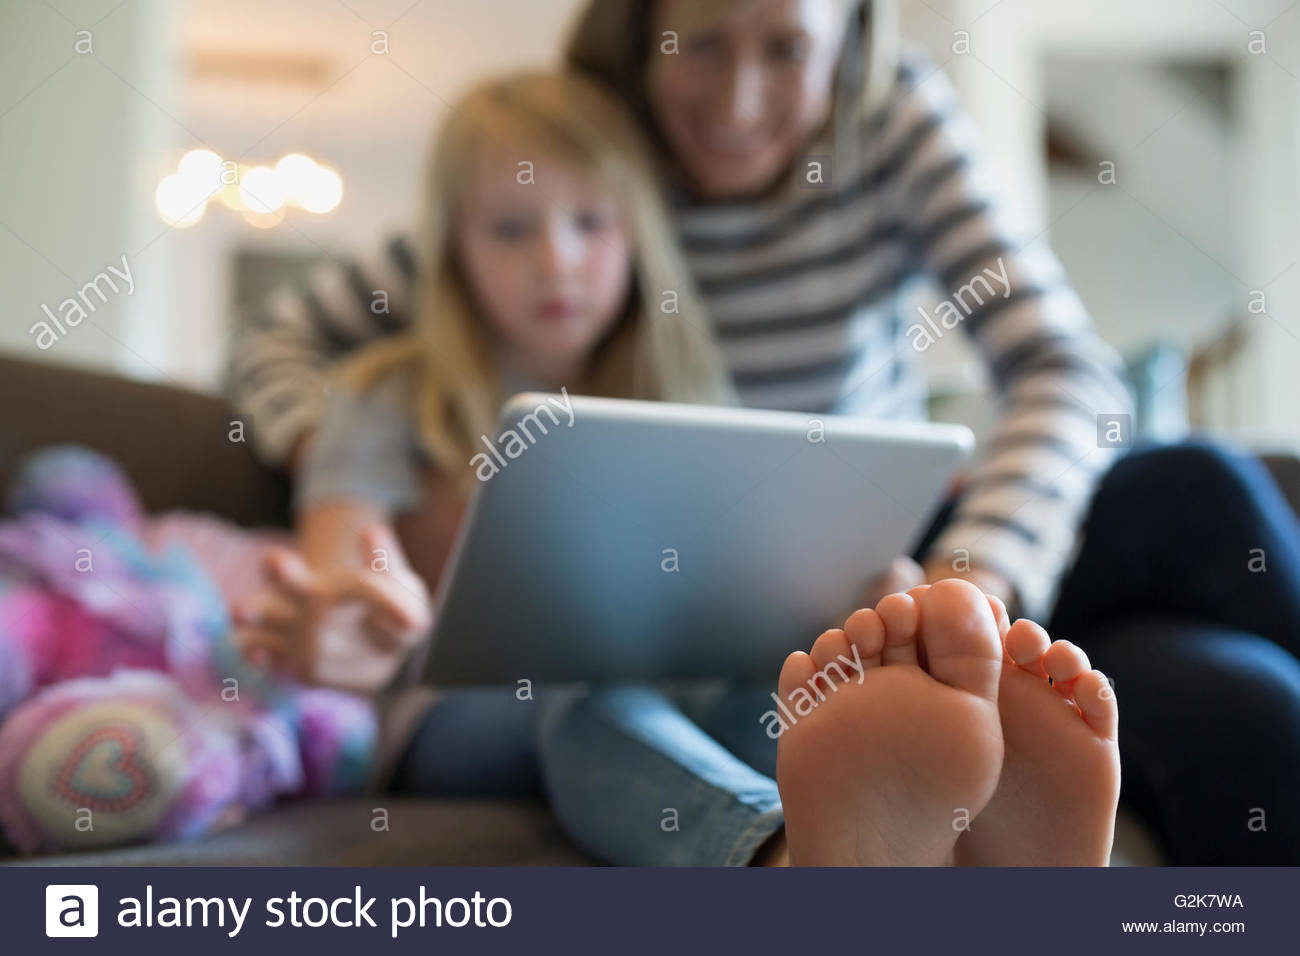 Mother and barefoot daughter using digital tablet on sofa Stock Photo